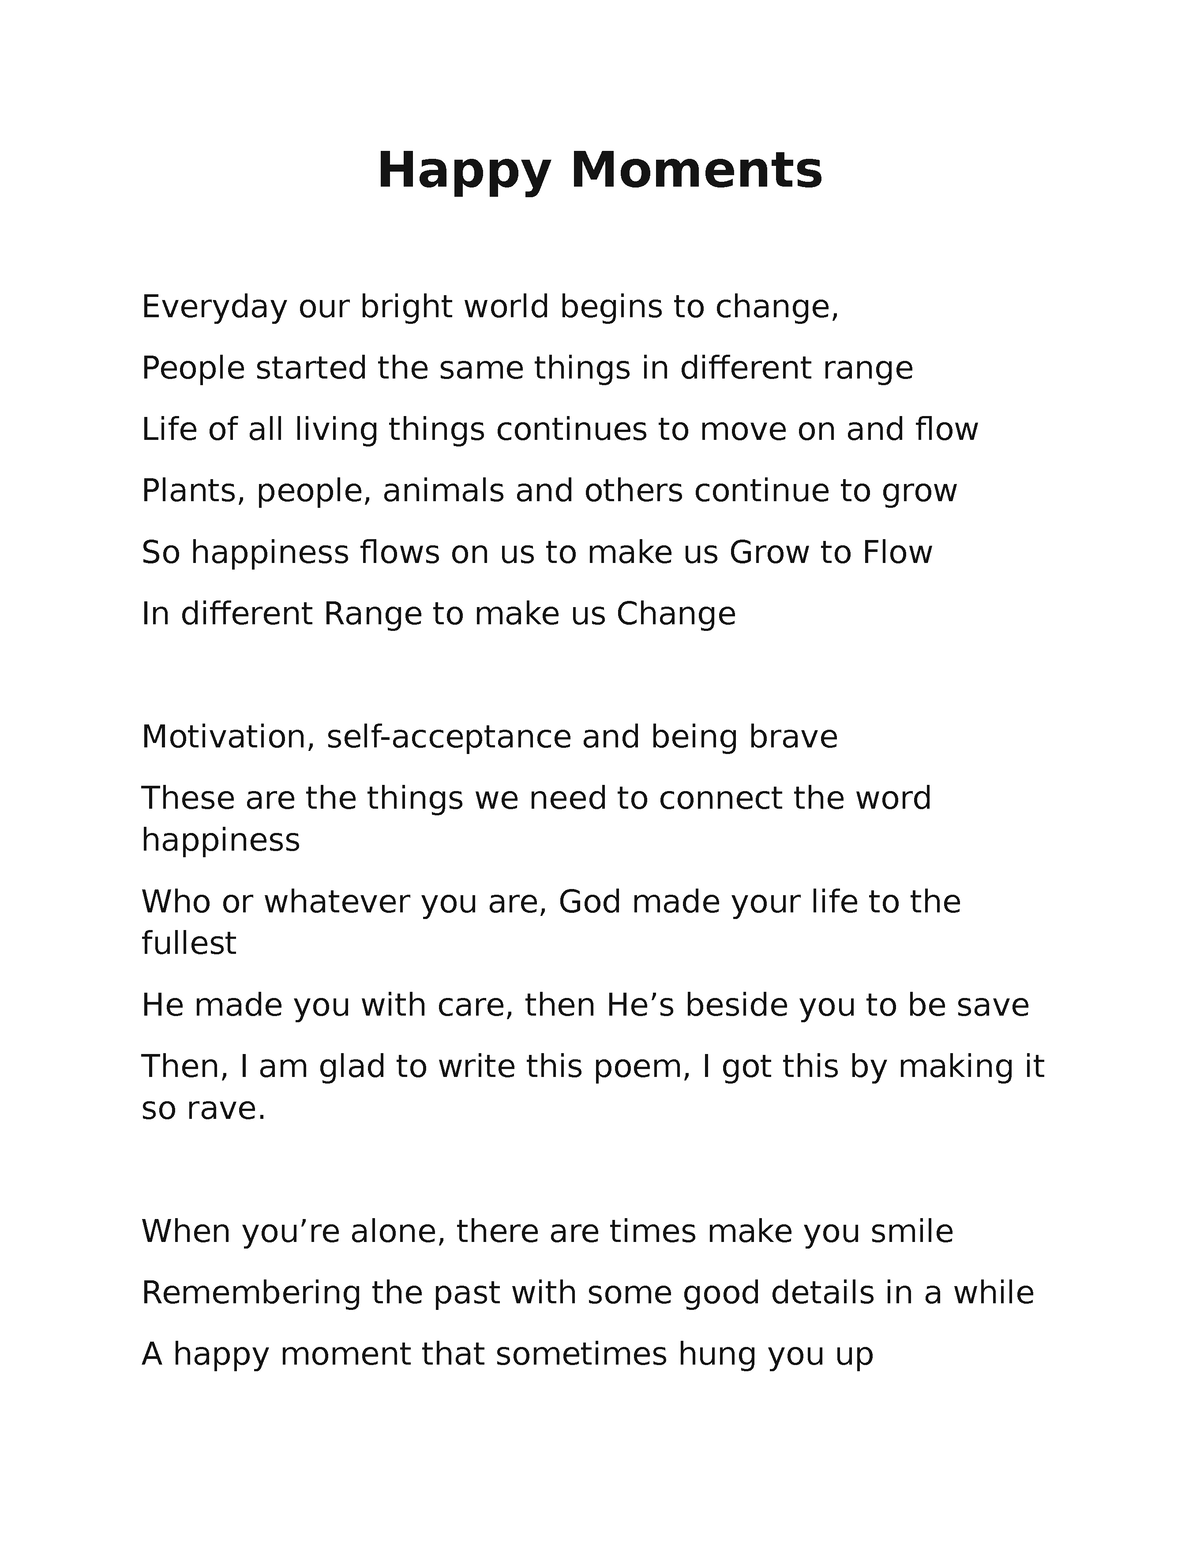 essay about happy moments